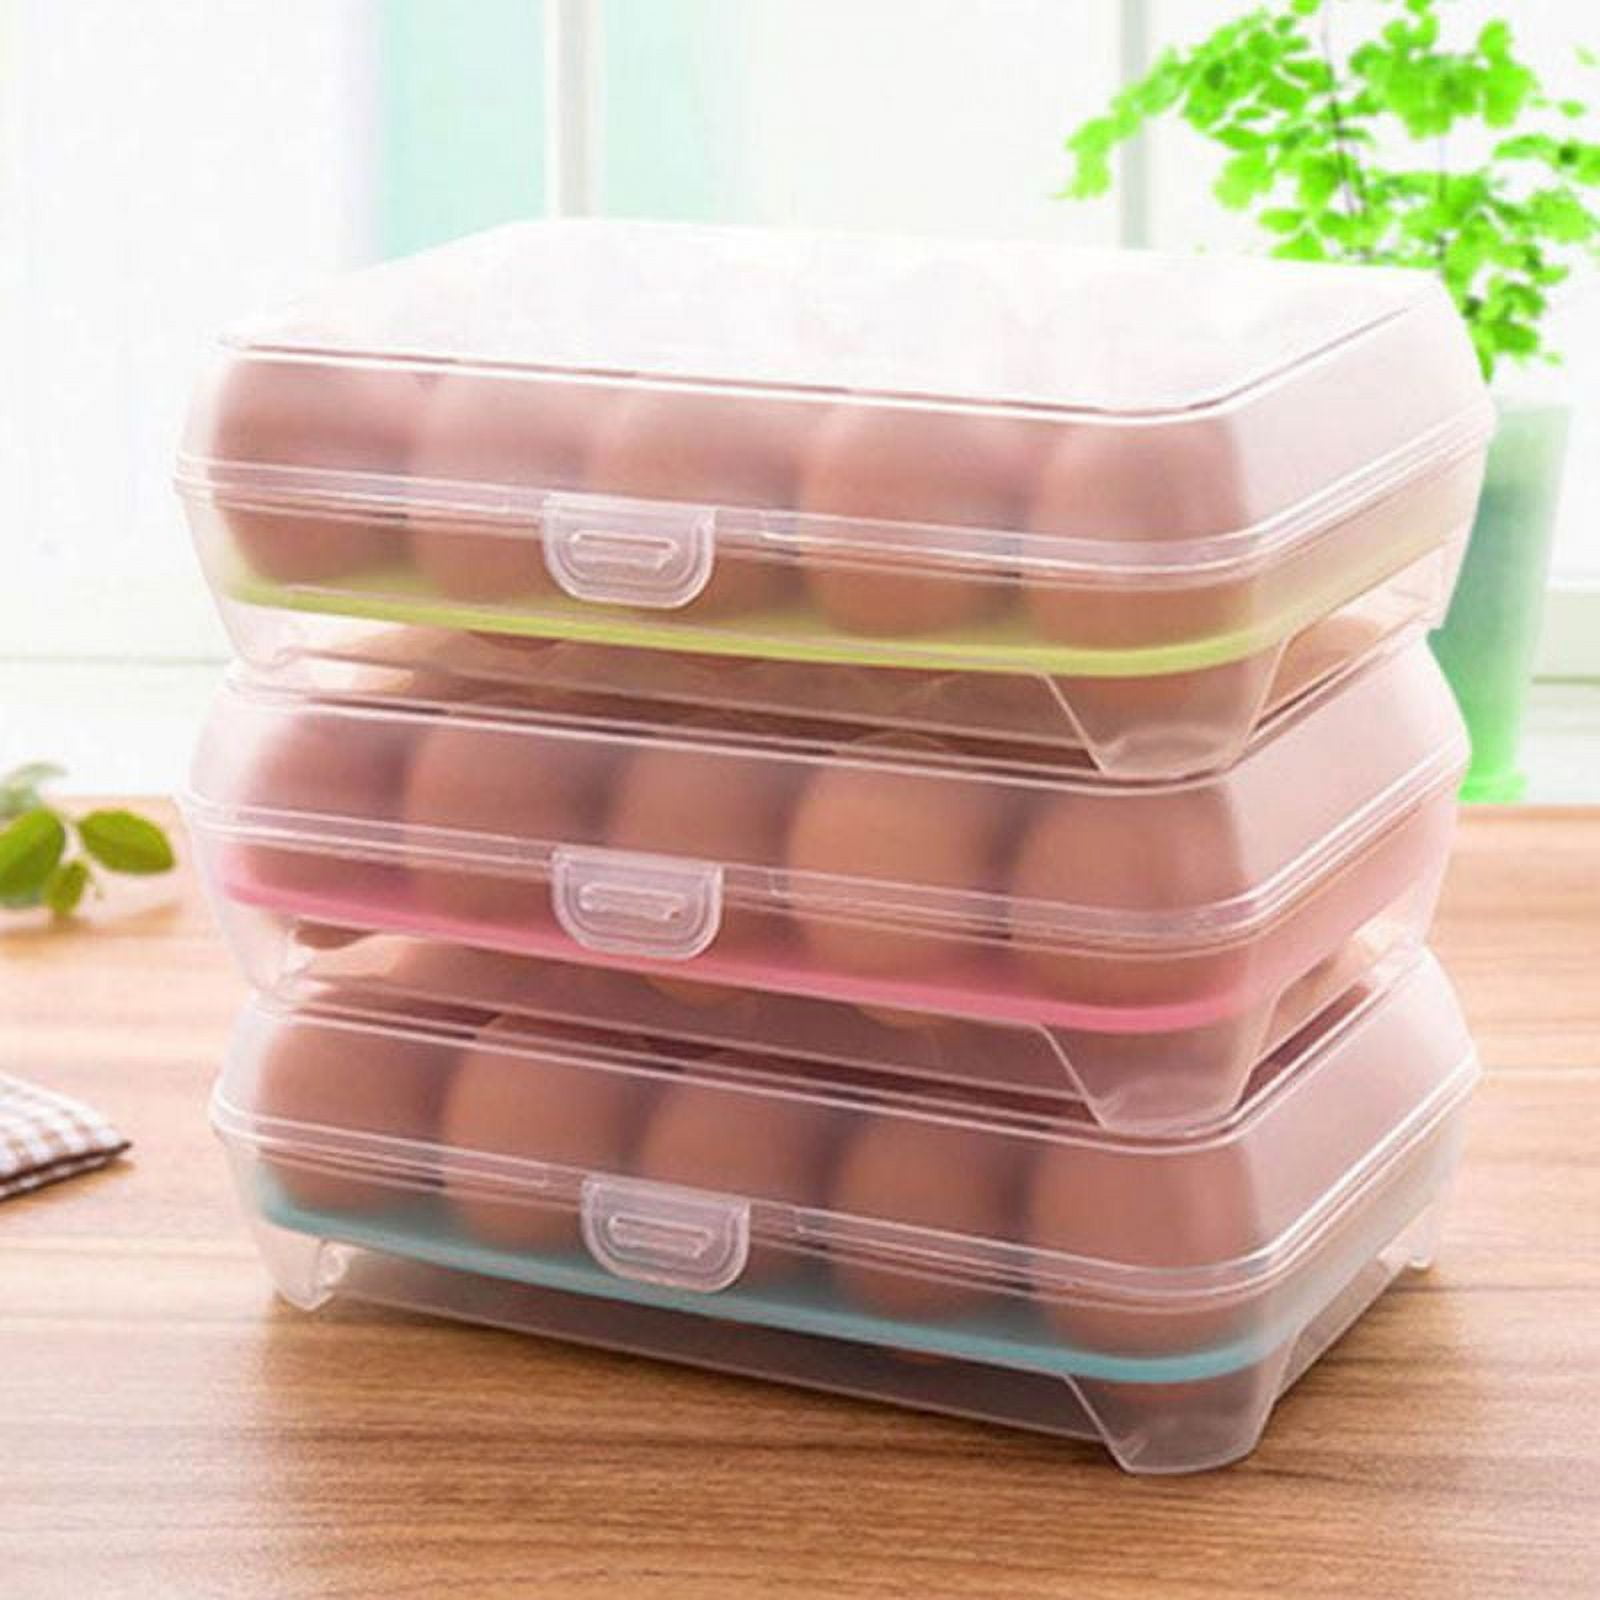 Snapware 2-Layer Snap 'N Stack Food Storage with Egg Holder Trays